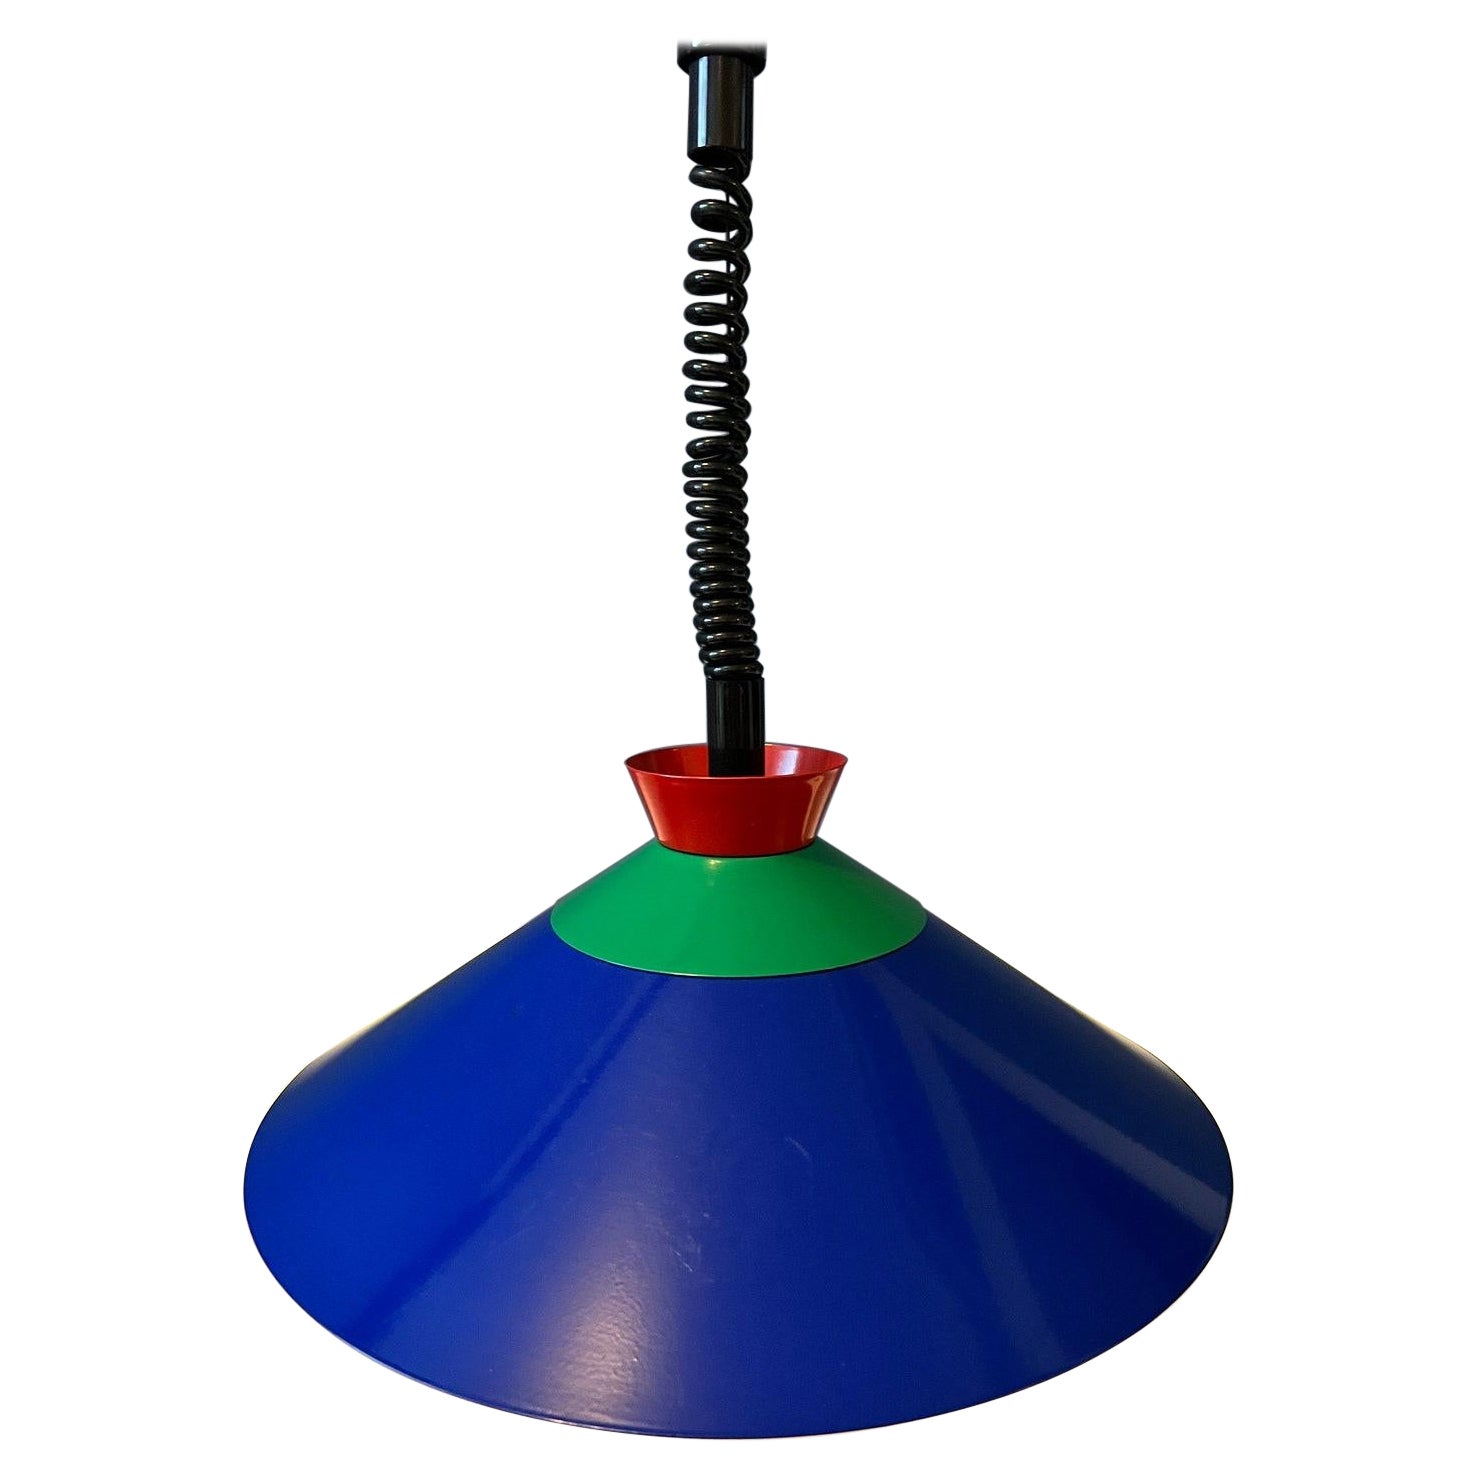 Vintage Memphis Suspension Pendant Lamp in Blue, Green and Red, 1970s For Sale